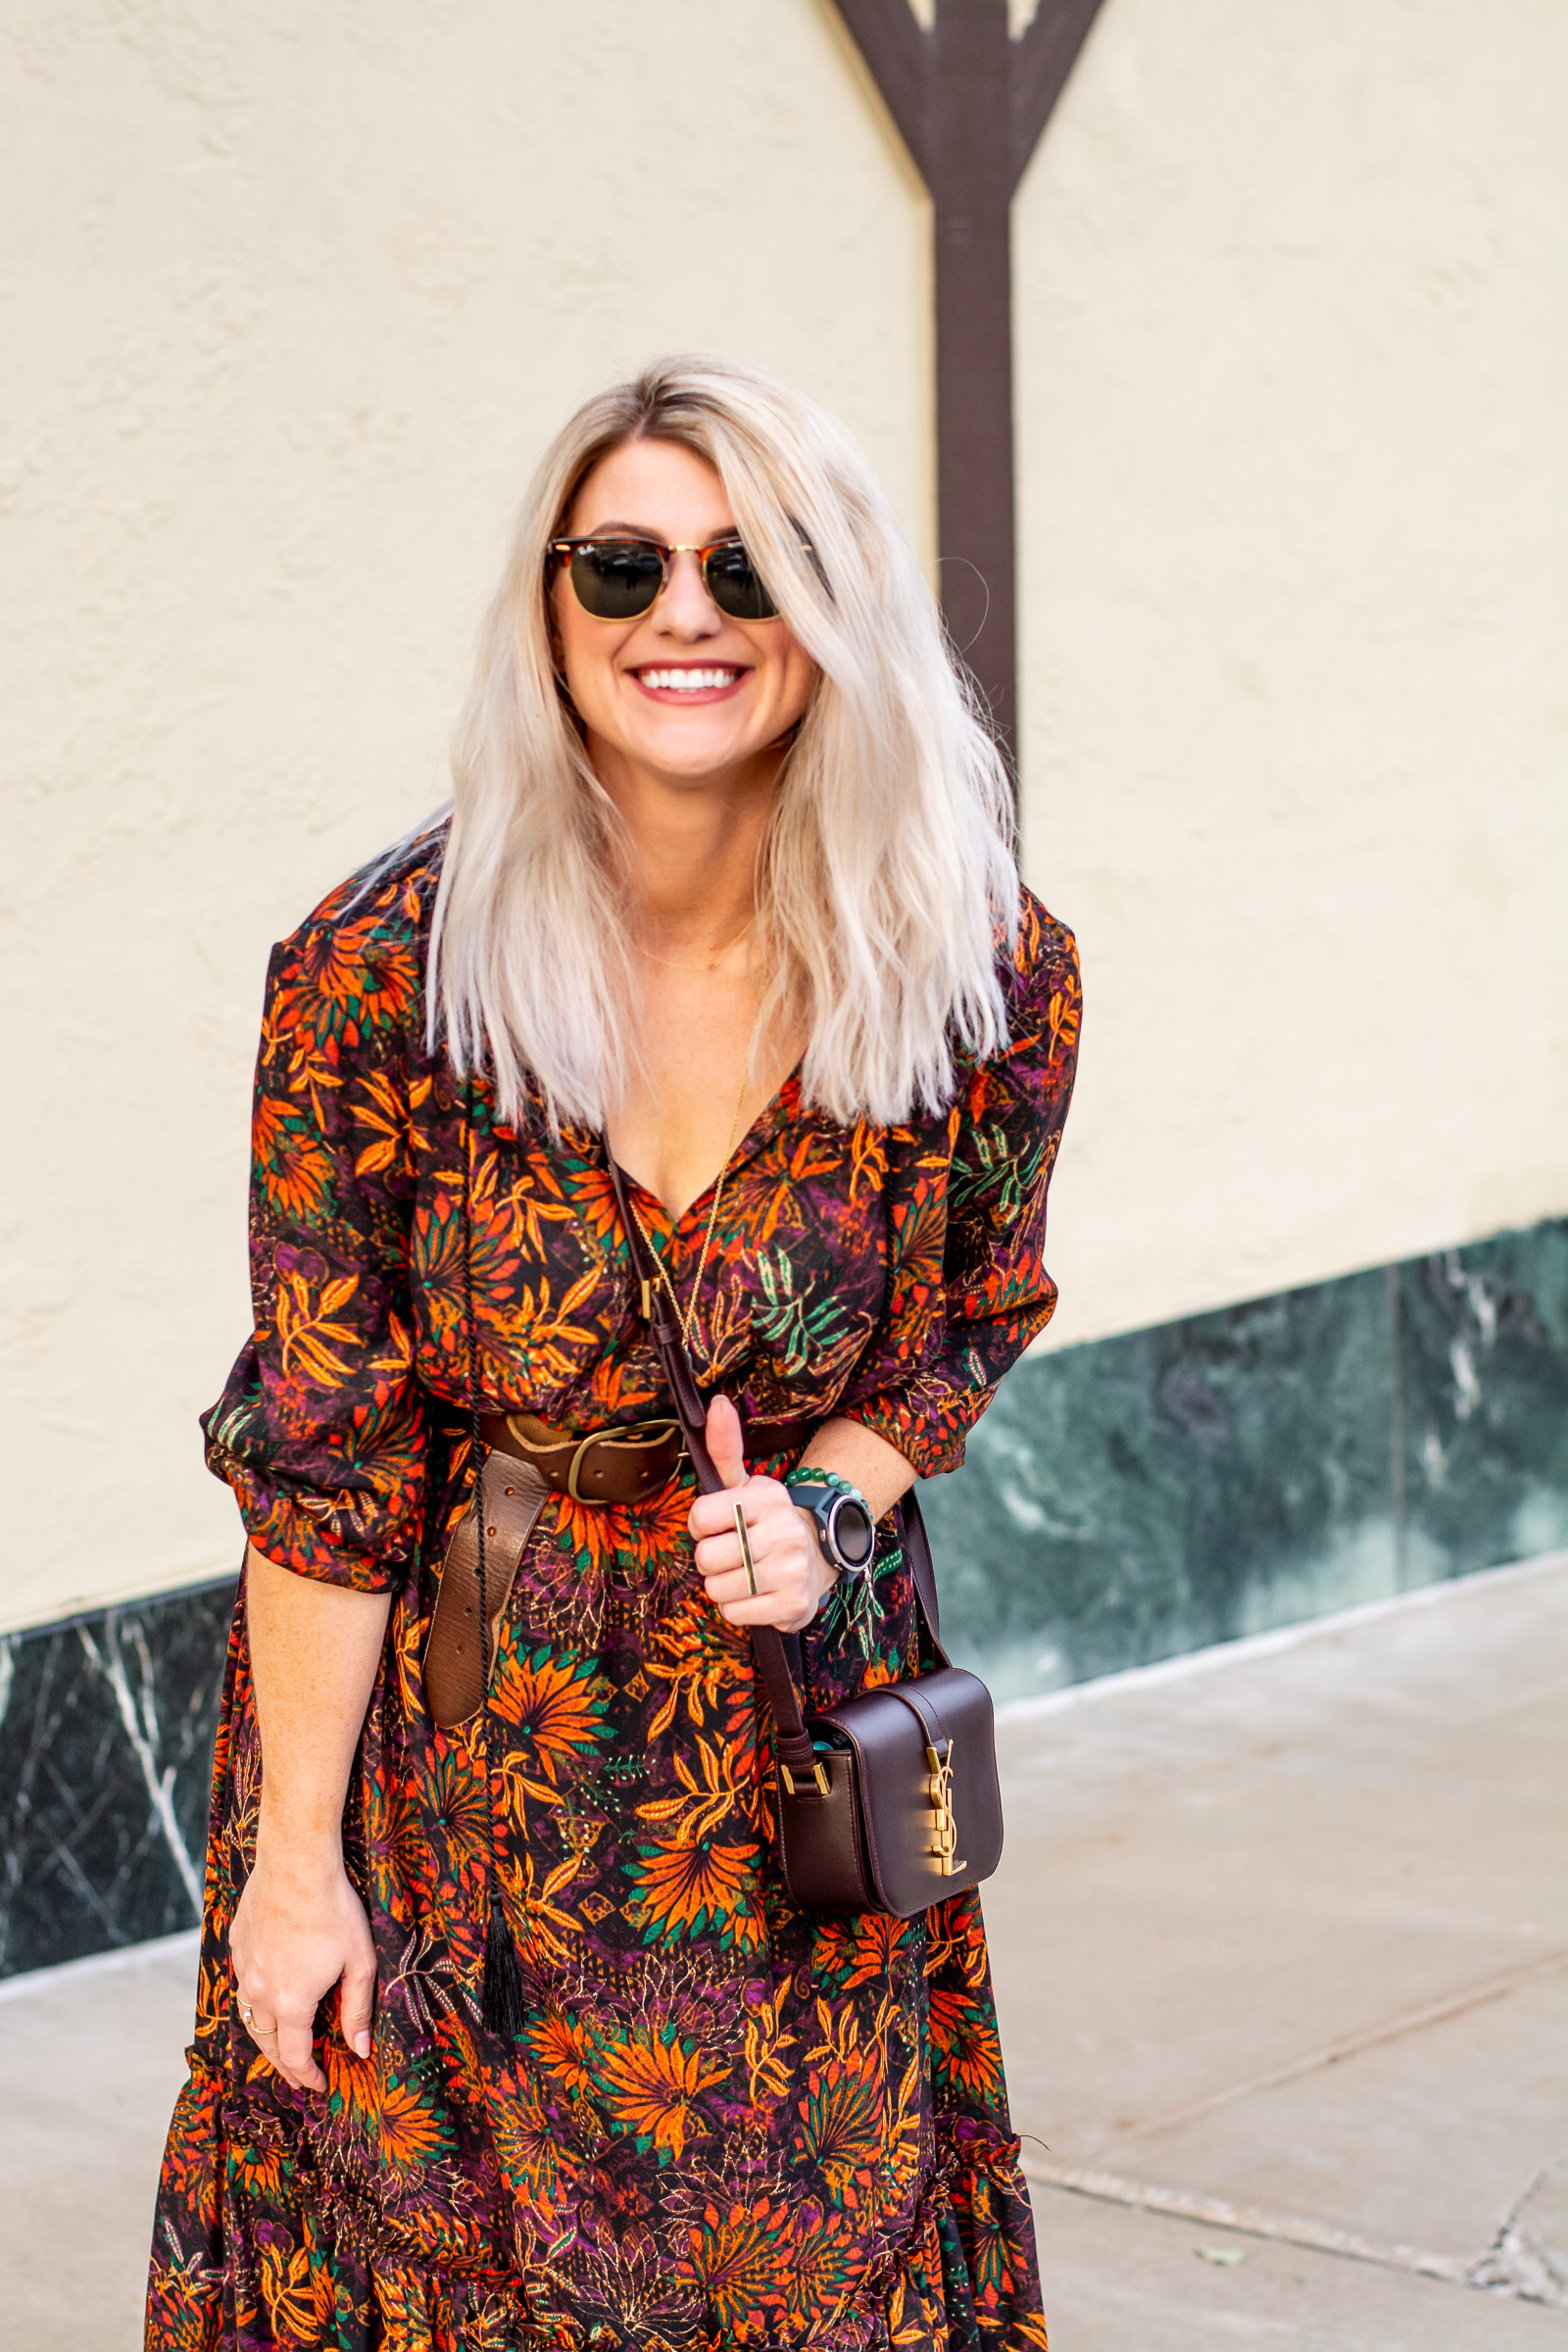 A Boho Dress with Booties for Fall. | Le Stylo Rouge